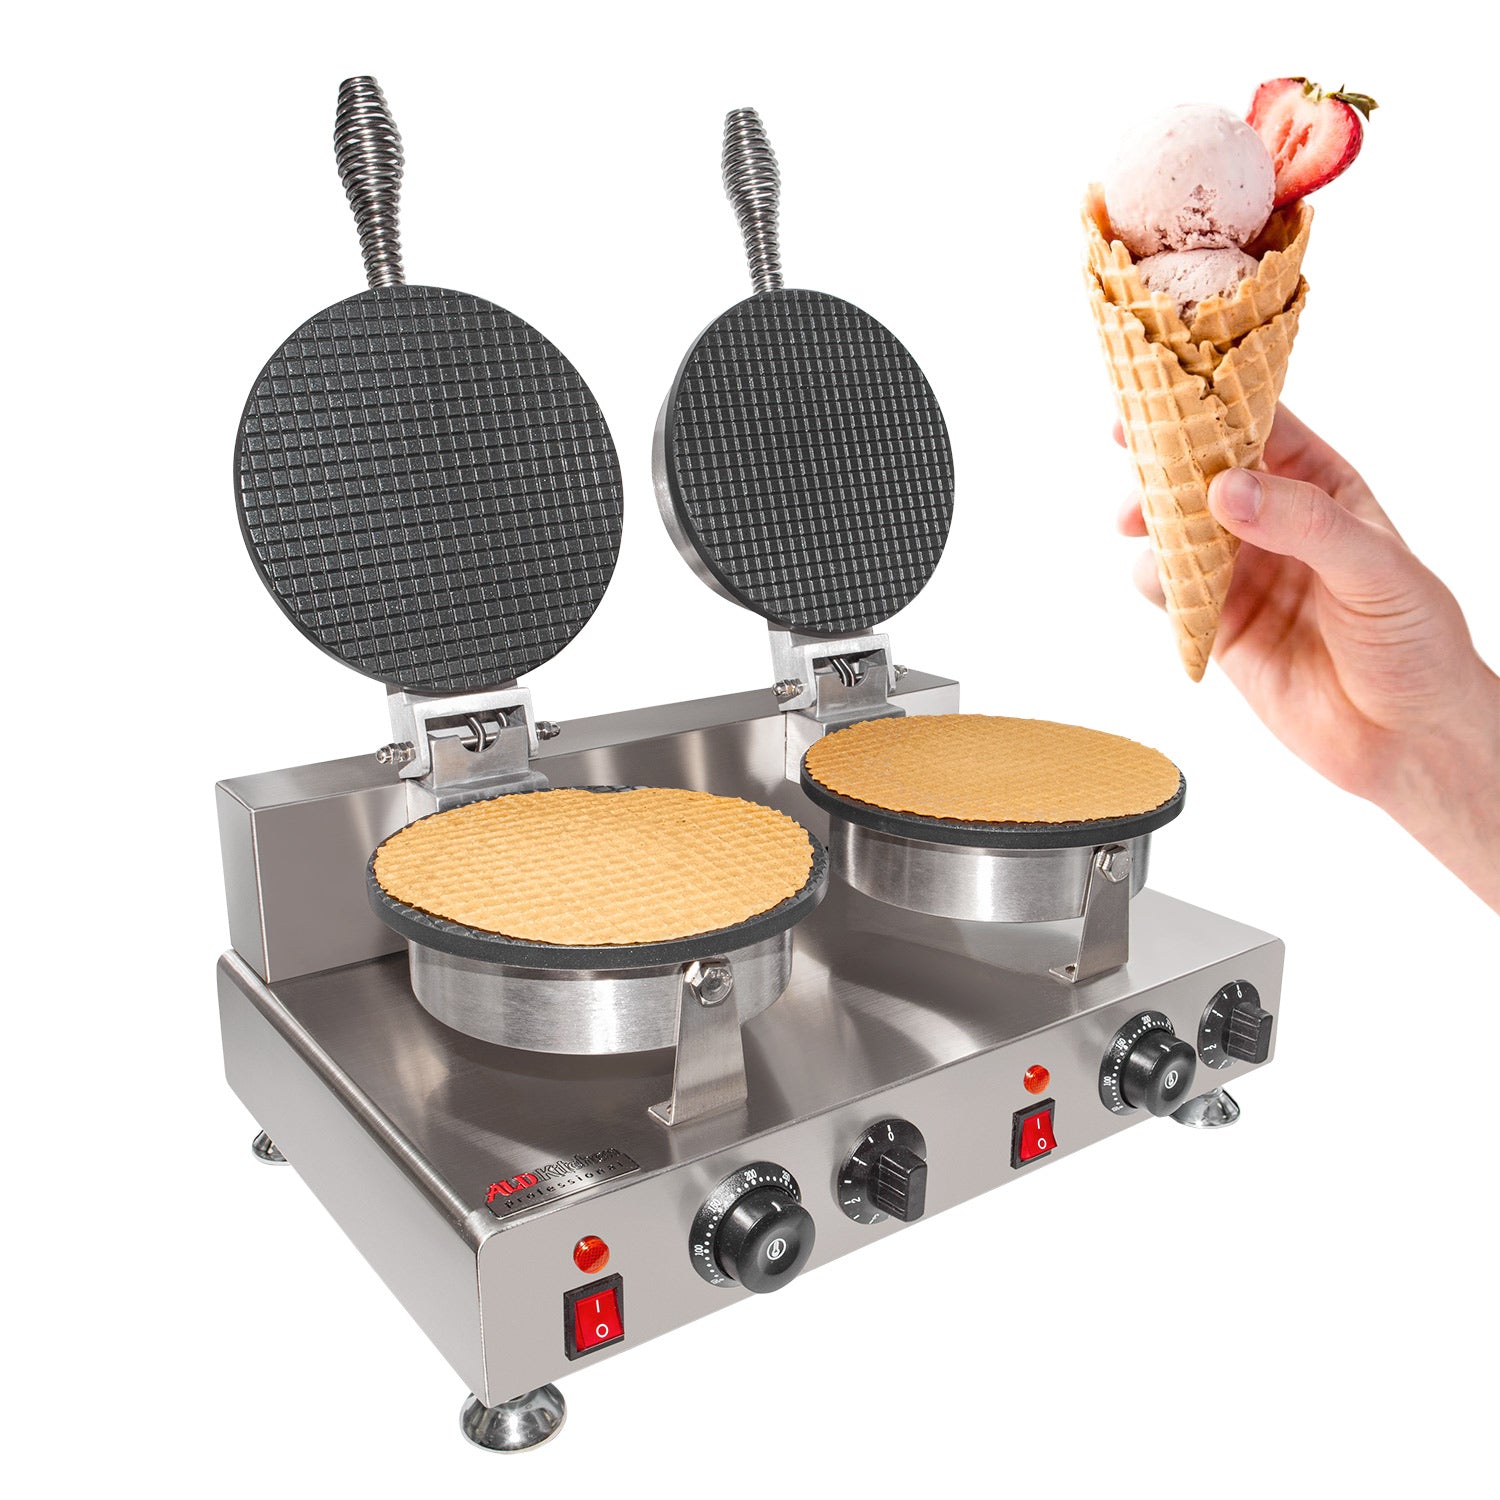 Accessories Serve Ice Cream Cones Wafer Wafers Pans Stock Photo by